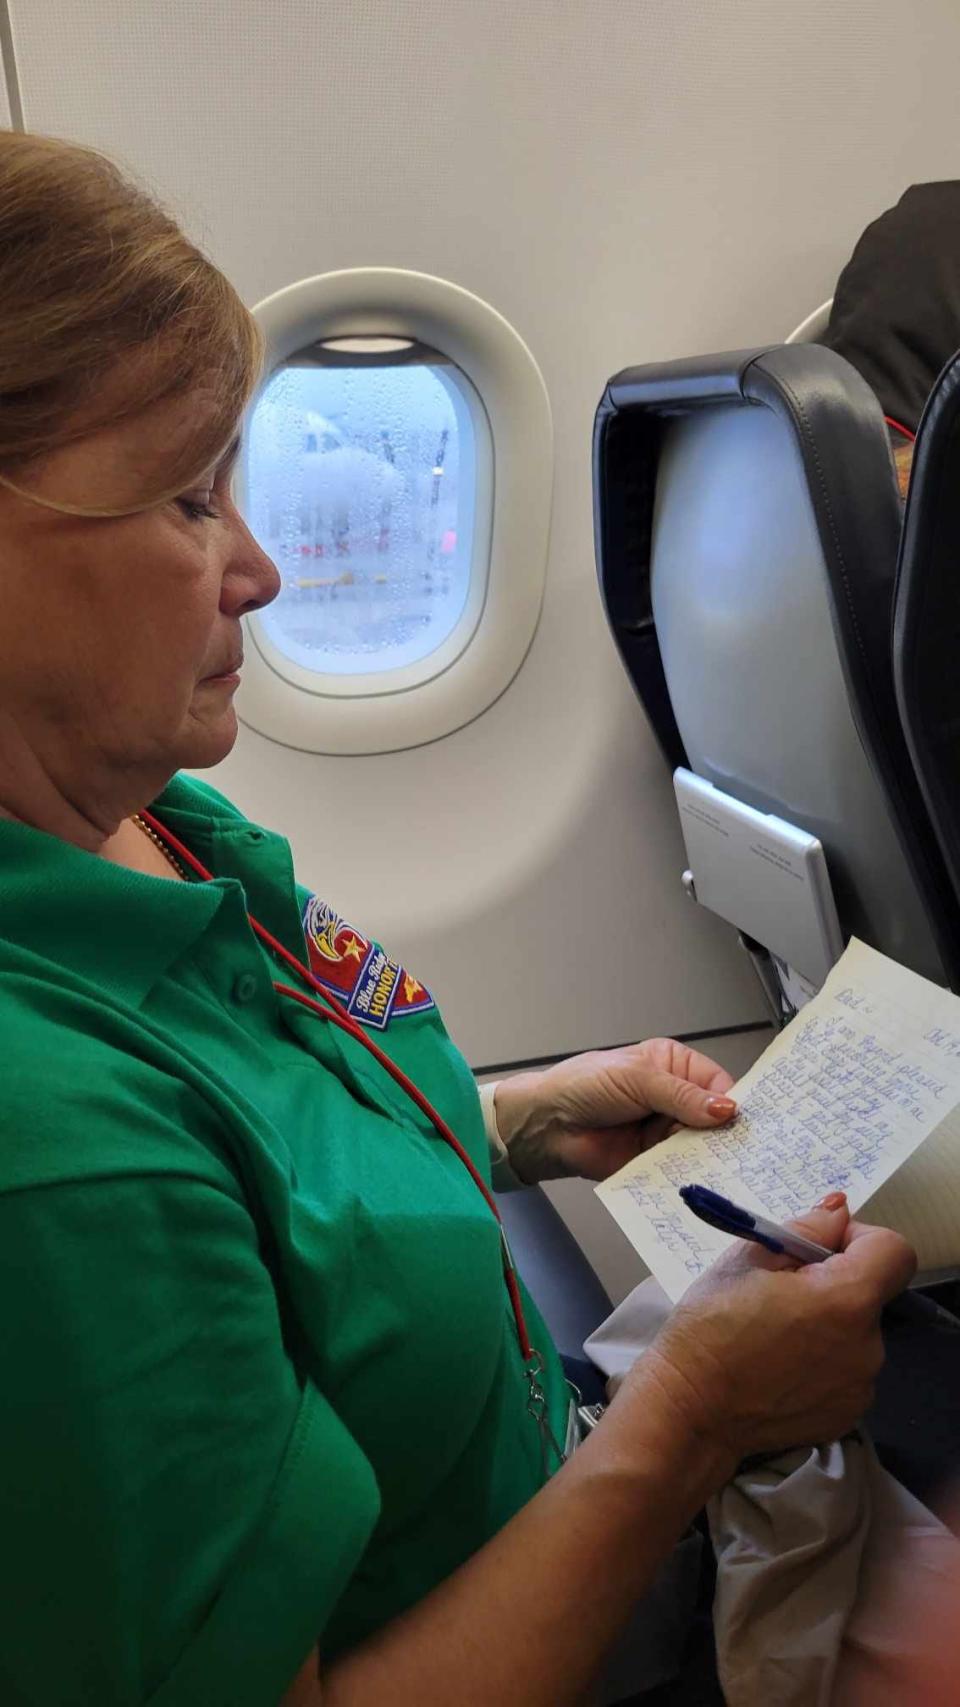 Flat Rock's Lucy Steppe writes a letter to her late father, Capt. John C. Kozuch. His plane went down during the Vietnam War and after 51 years, his remains still haven't been found.